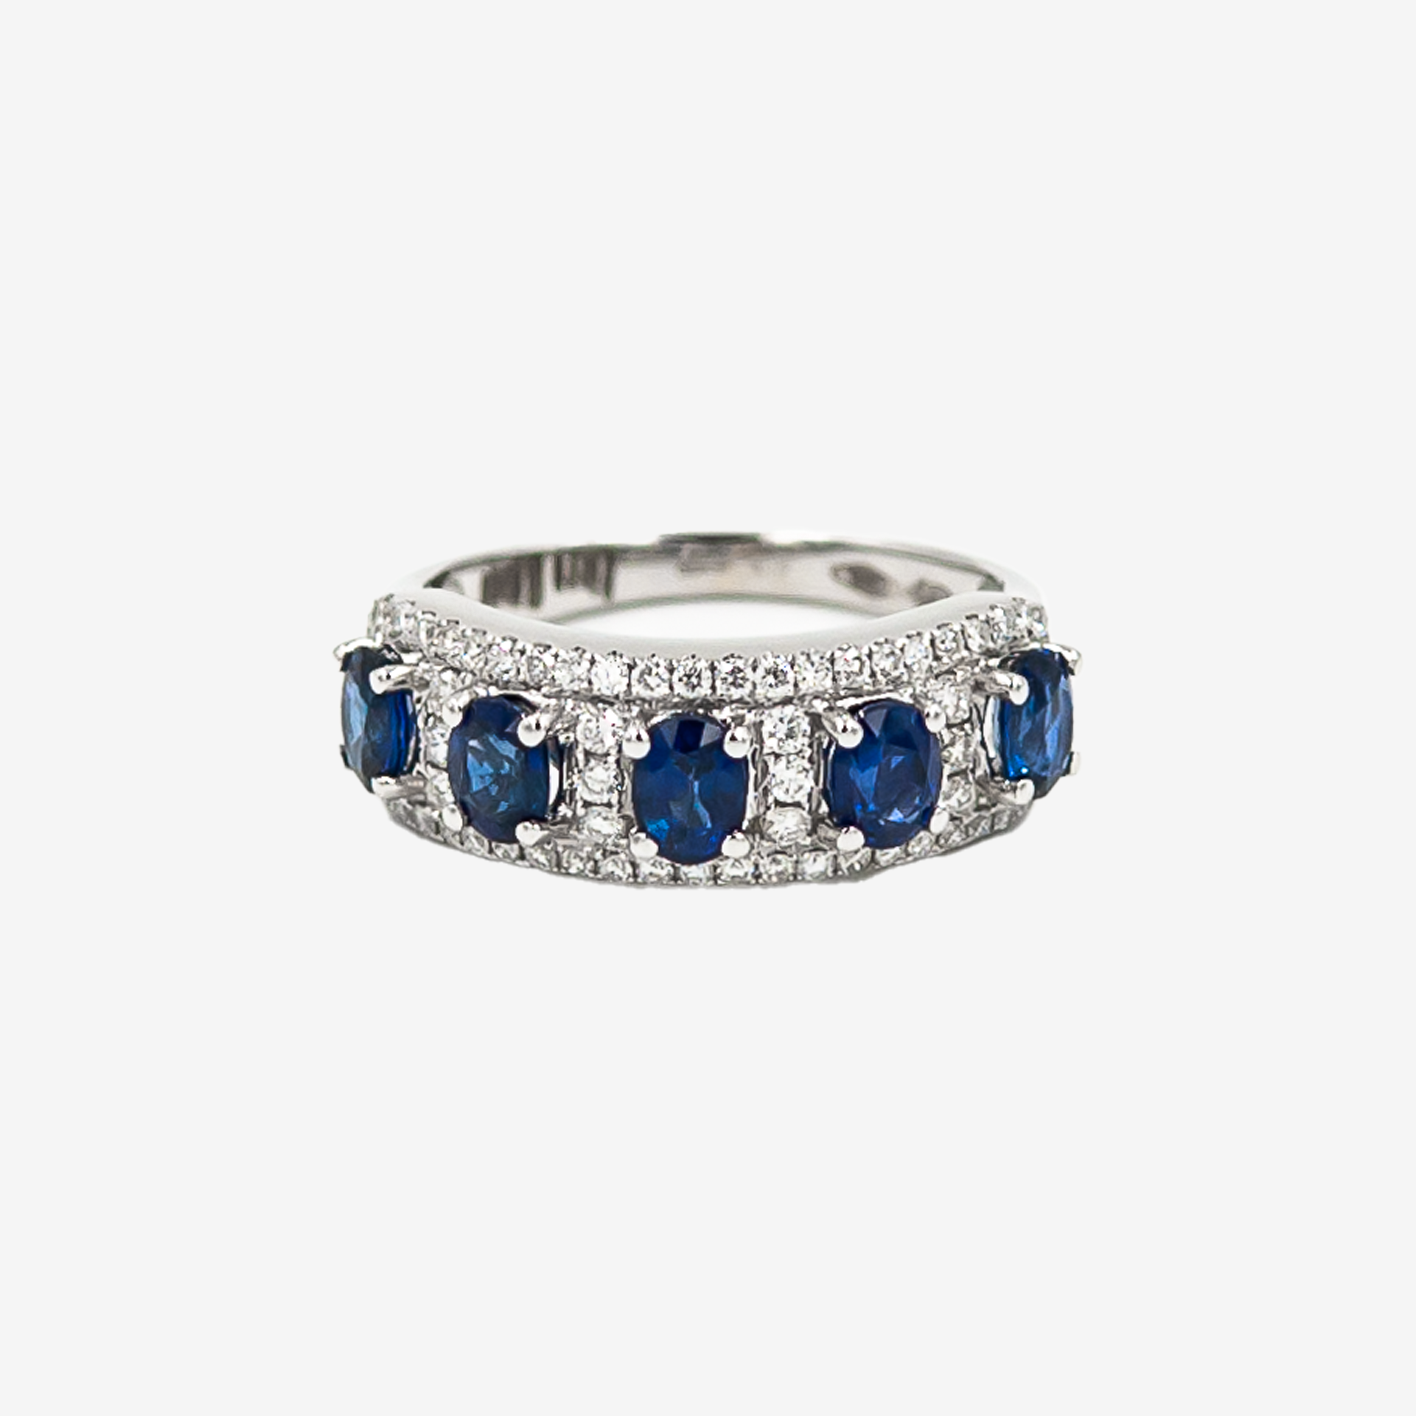 Semi Eternity Ring with Sapphires and Diamonds